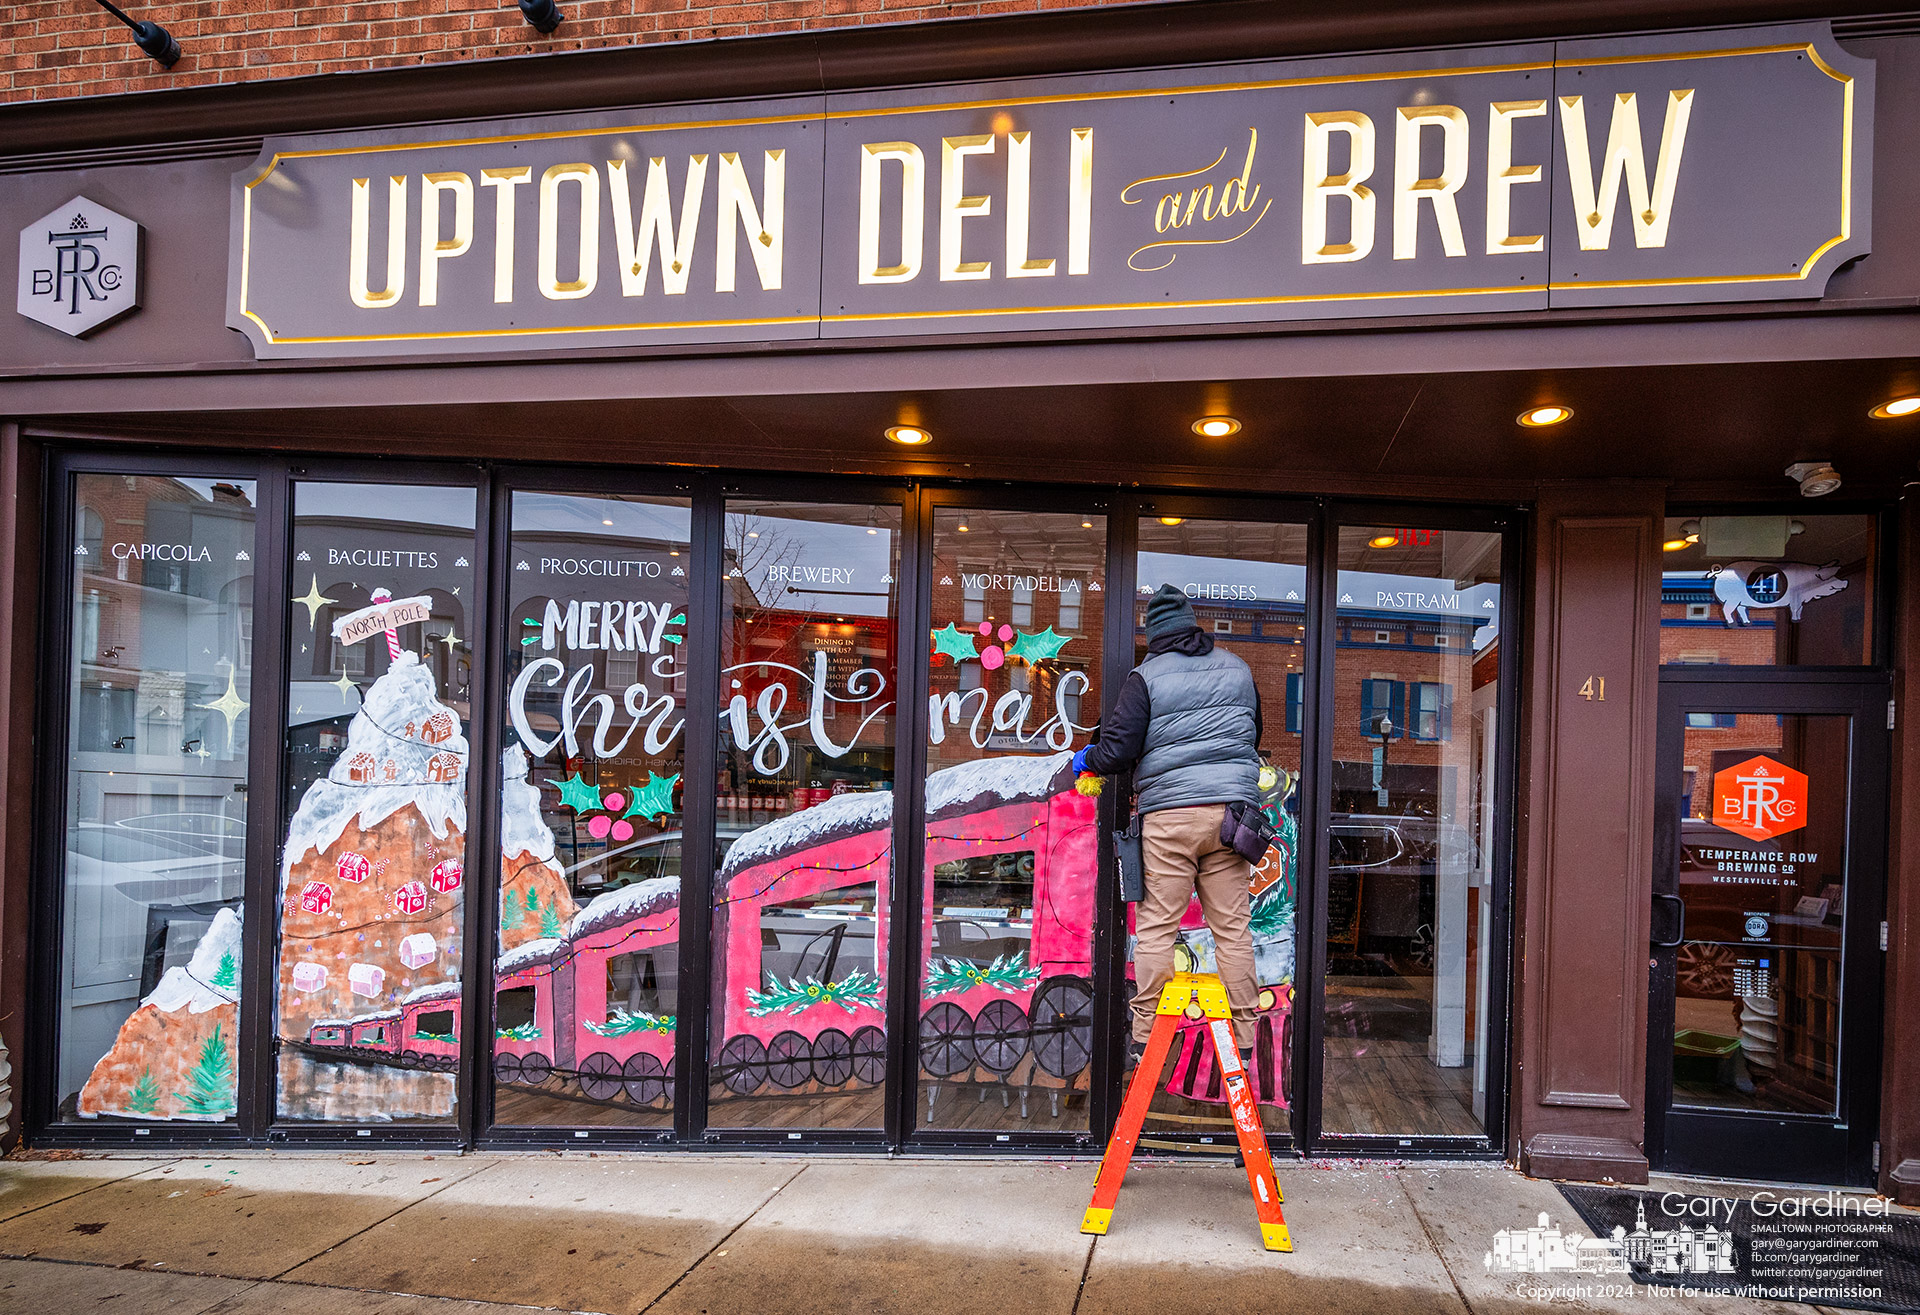 Micah Crockett removes the decorative Christmas painting on the seven door panels at the front of Uptown Deli and Brew on Epiphany, marking the Christmas season's end. My Final Photo for January 6, 2024.